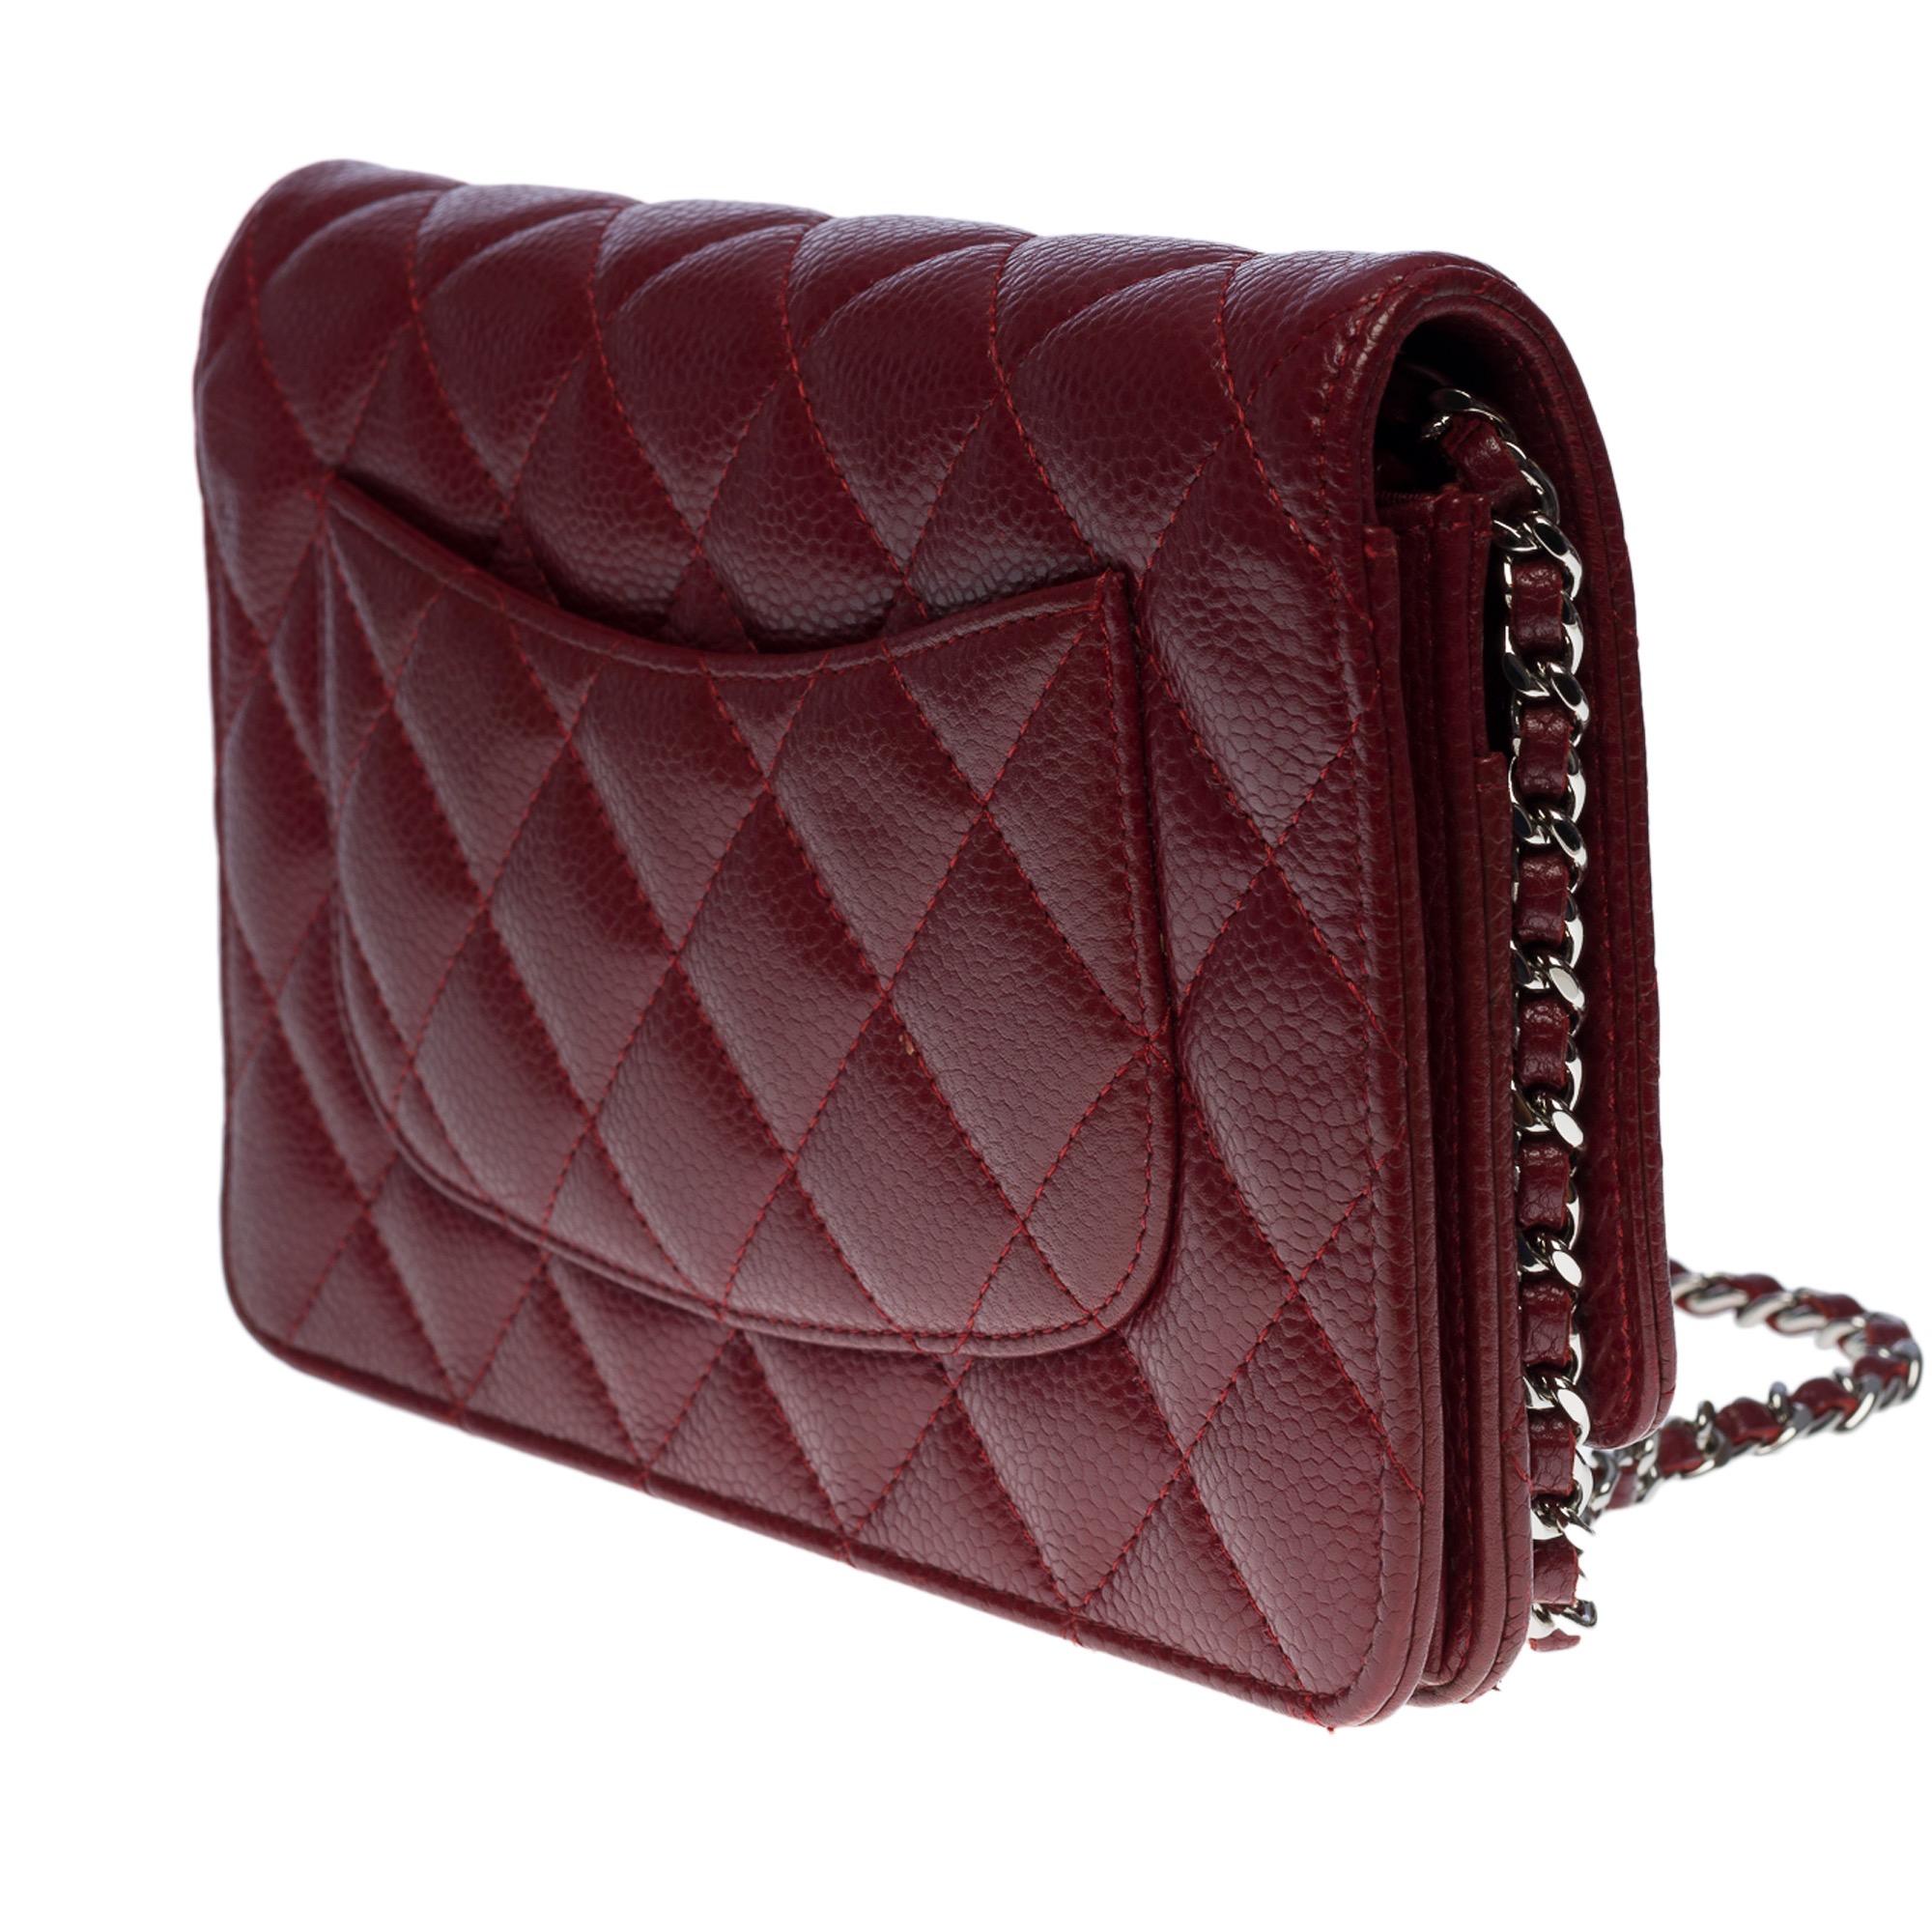 Chanel Wallet On Chain handbag in burgundy quilted caviar leather, SHW 1